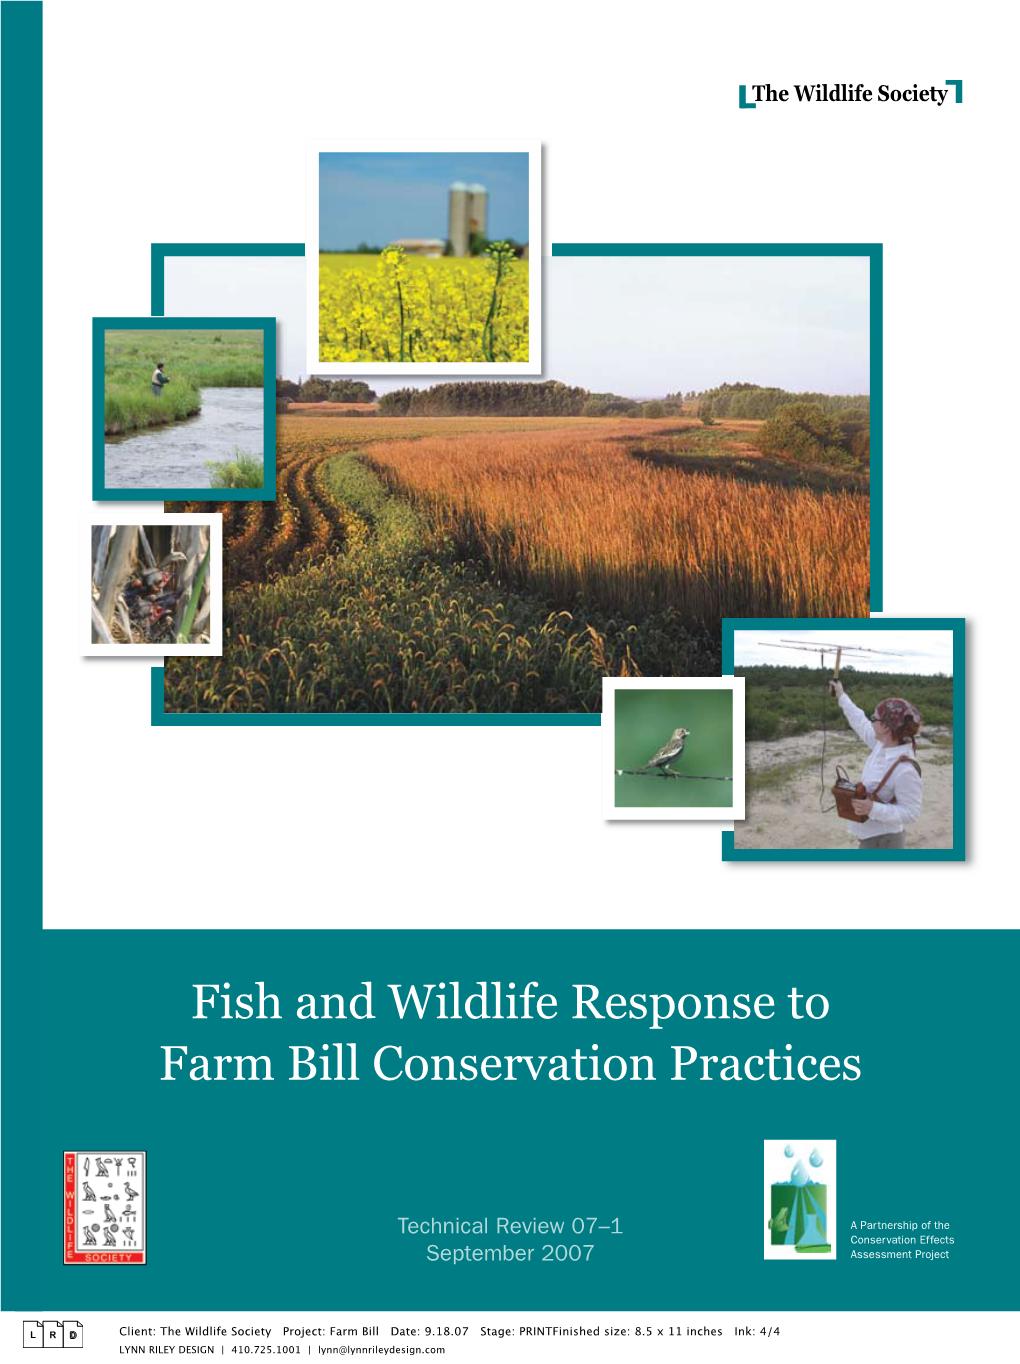 Fish and Wildlife Response to Farm Bill Conservation Practices